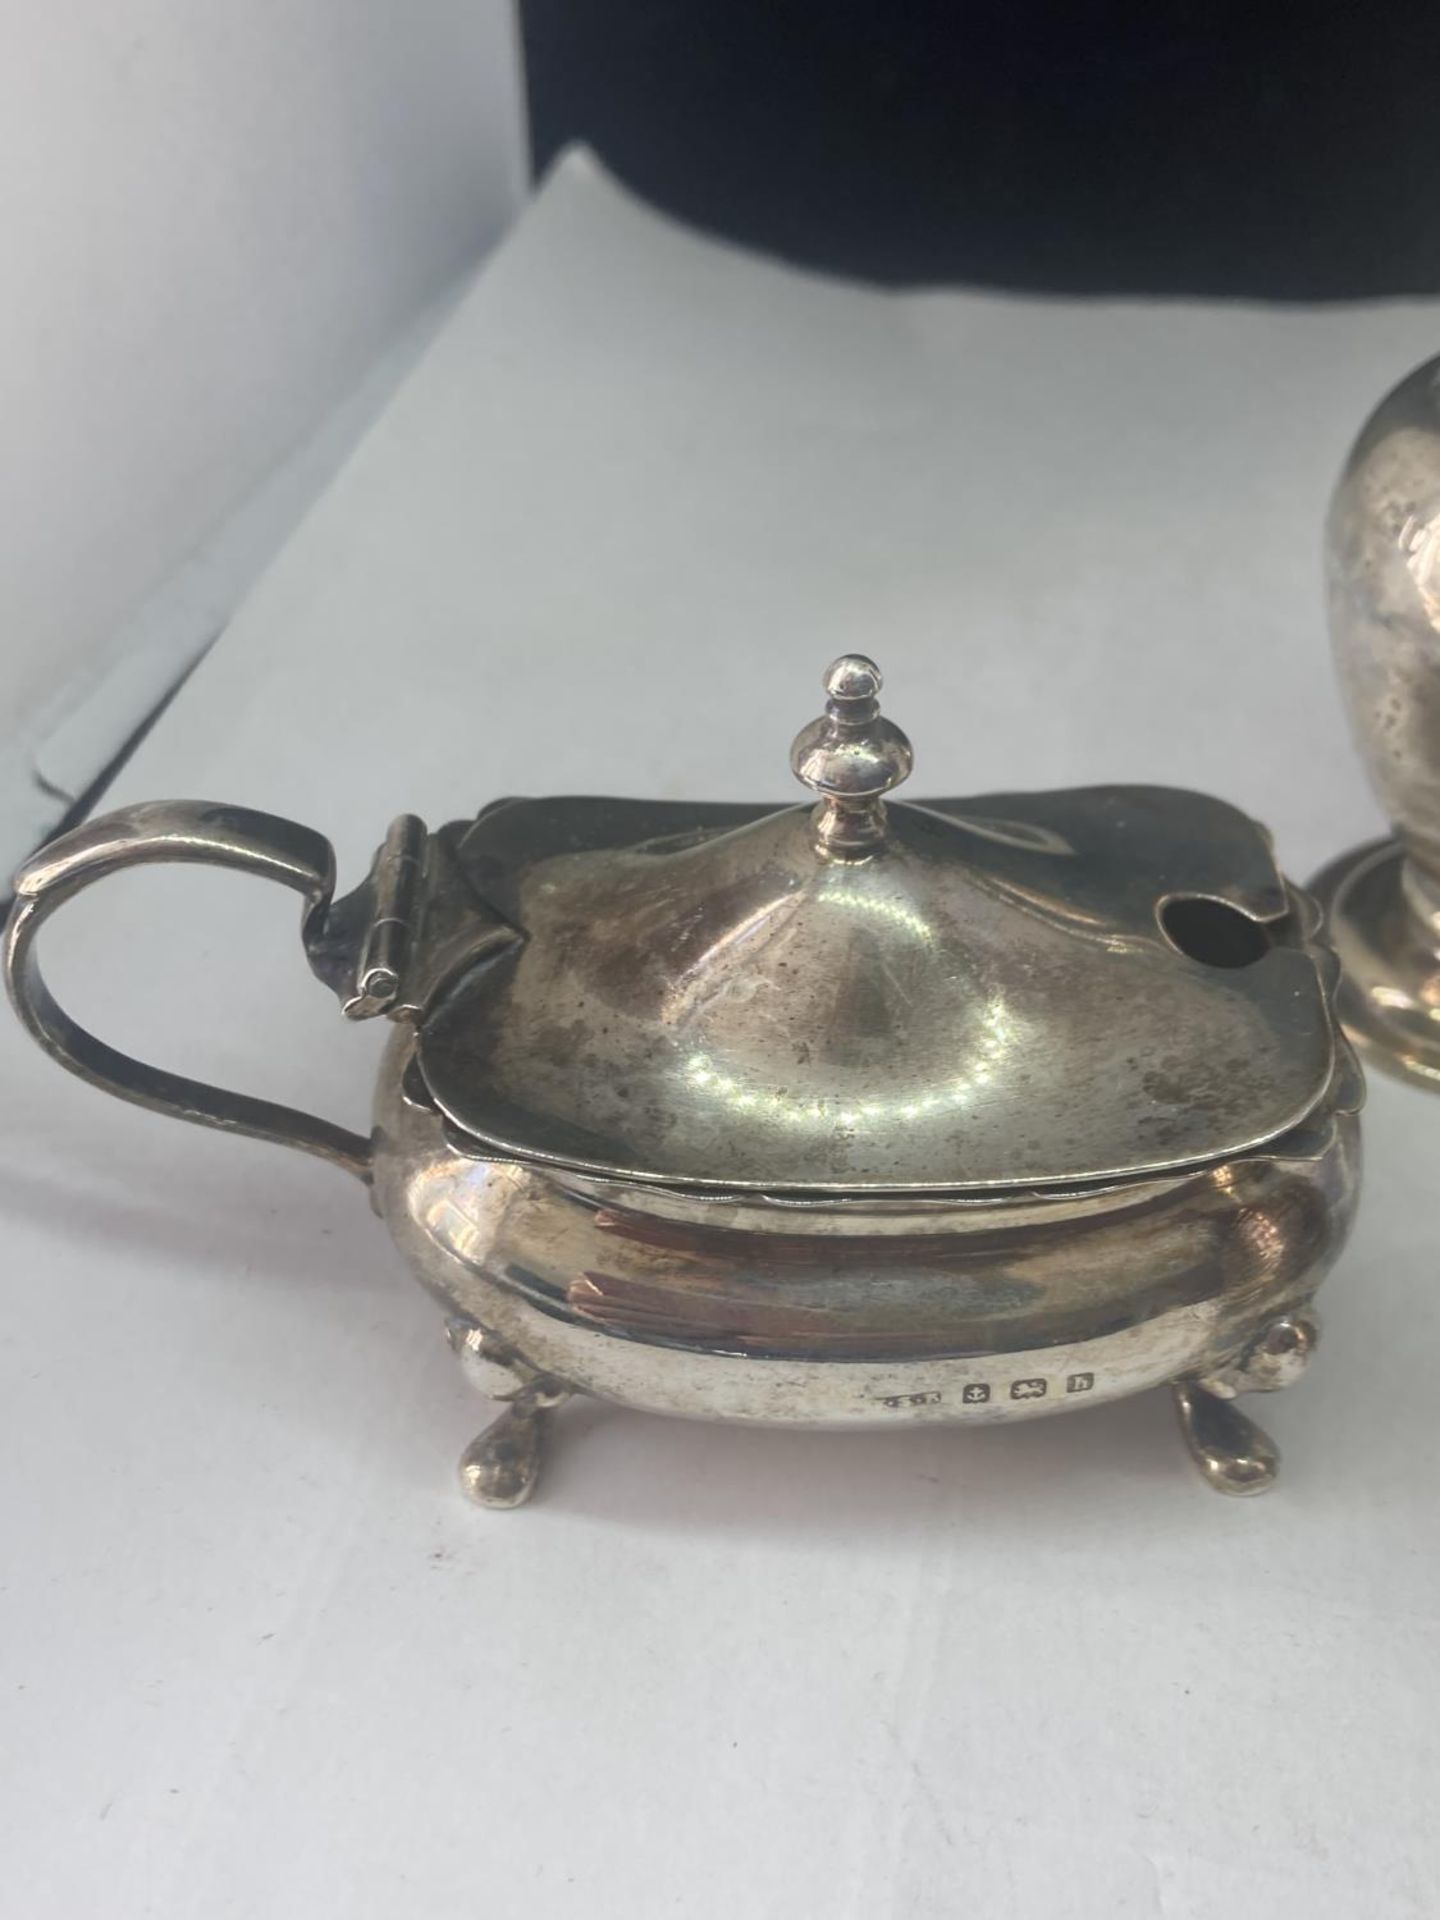 TWO HALLMARKED SILVER POTS (ONE WITH BLUE GLASS LINER) AND A HALLMARKED LONDON PEPPER POT GROSS - Image 3 of 8